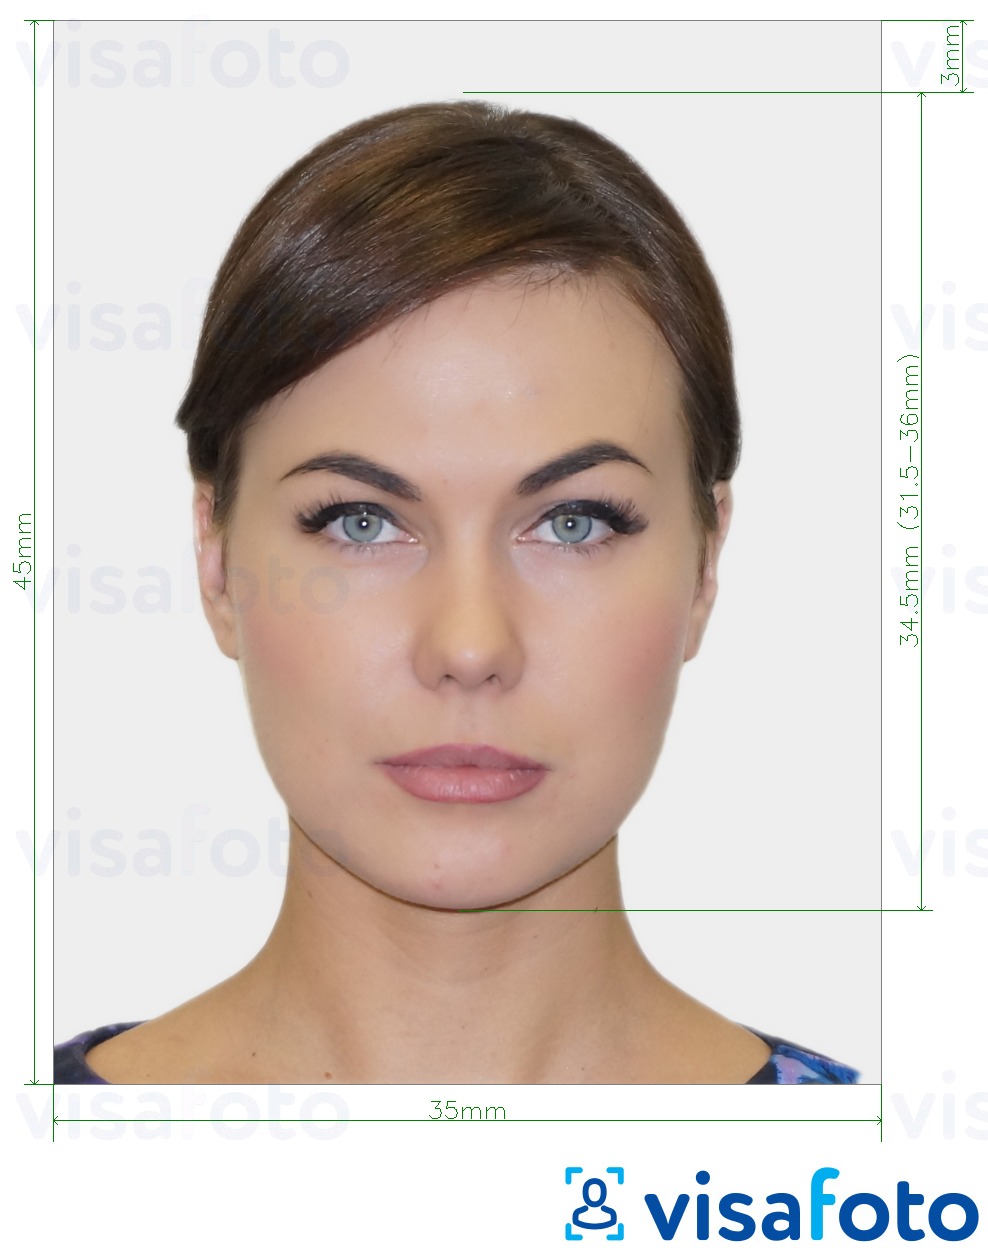 Example of photo for Austrian ID card 35x45 mm (3.5x4.5 cm) with exact size specification